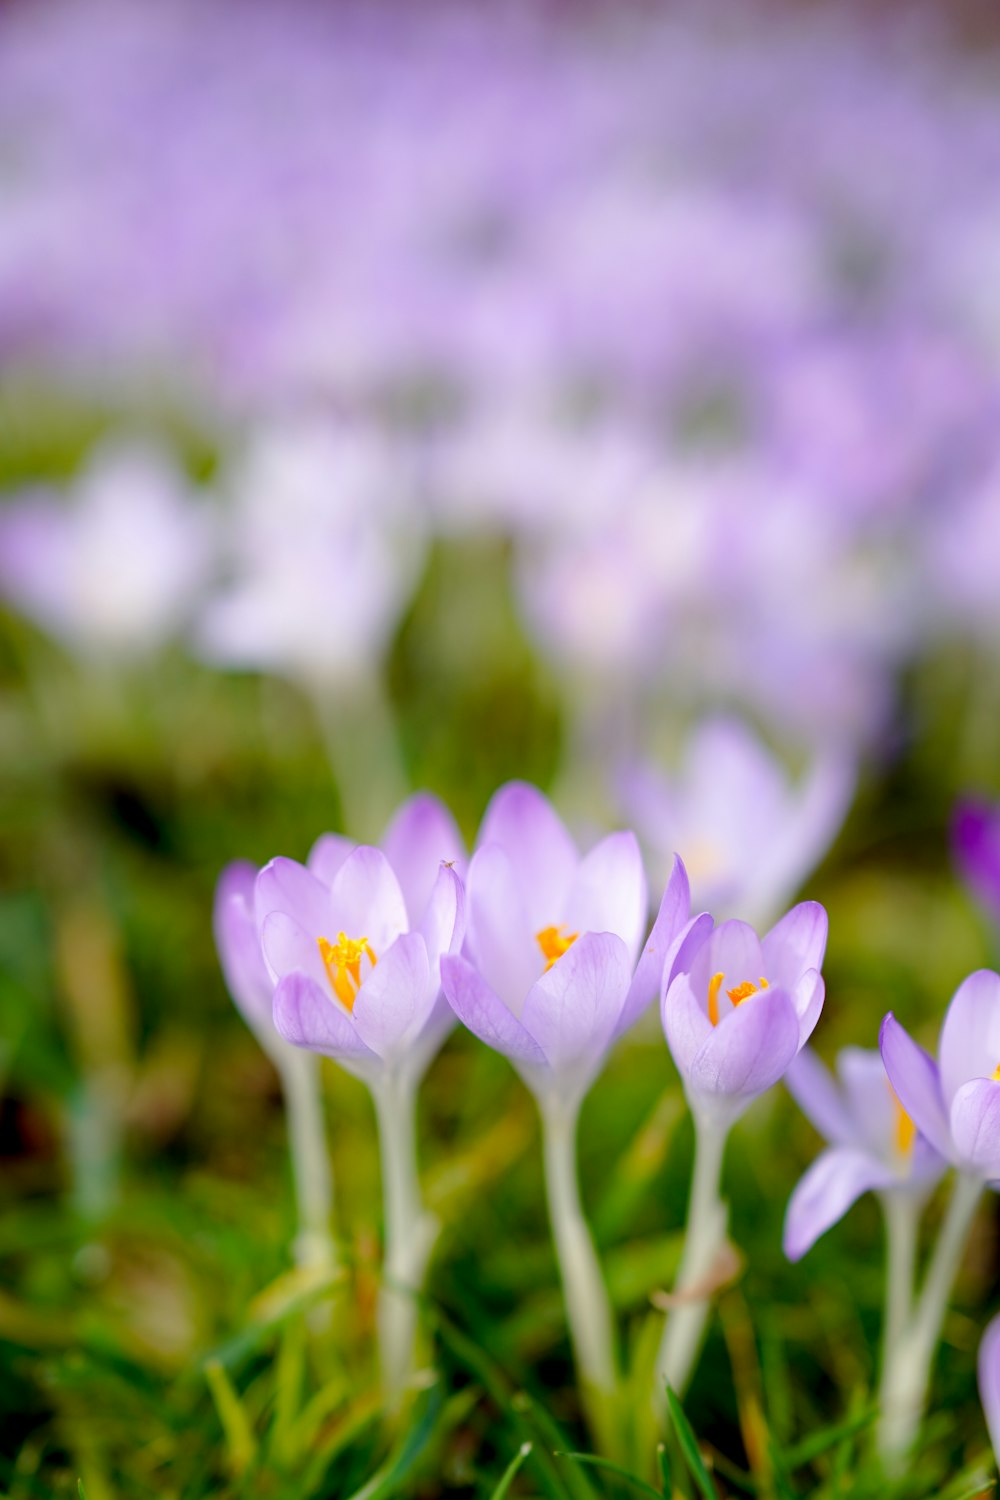 white and purple crocus flowers in bloom during daytime